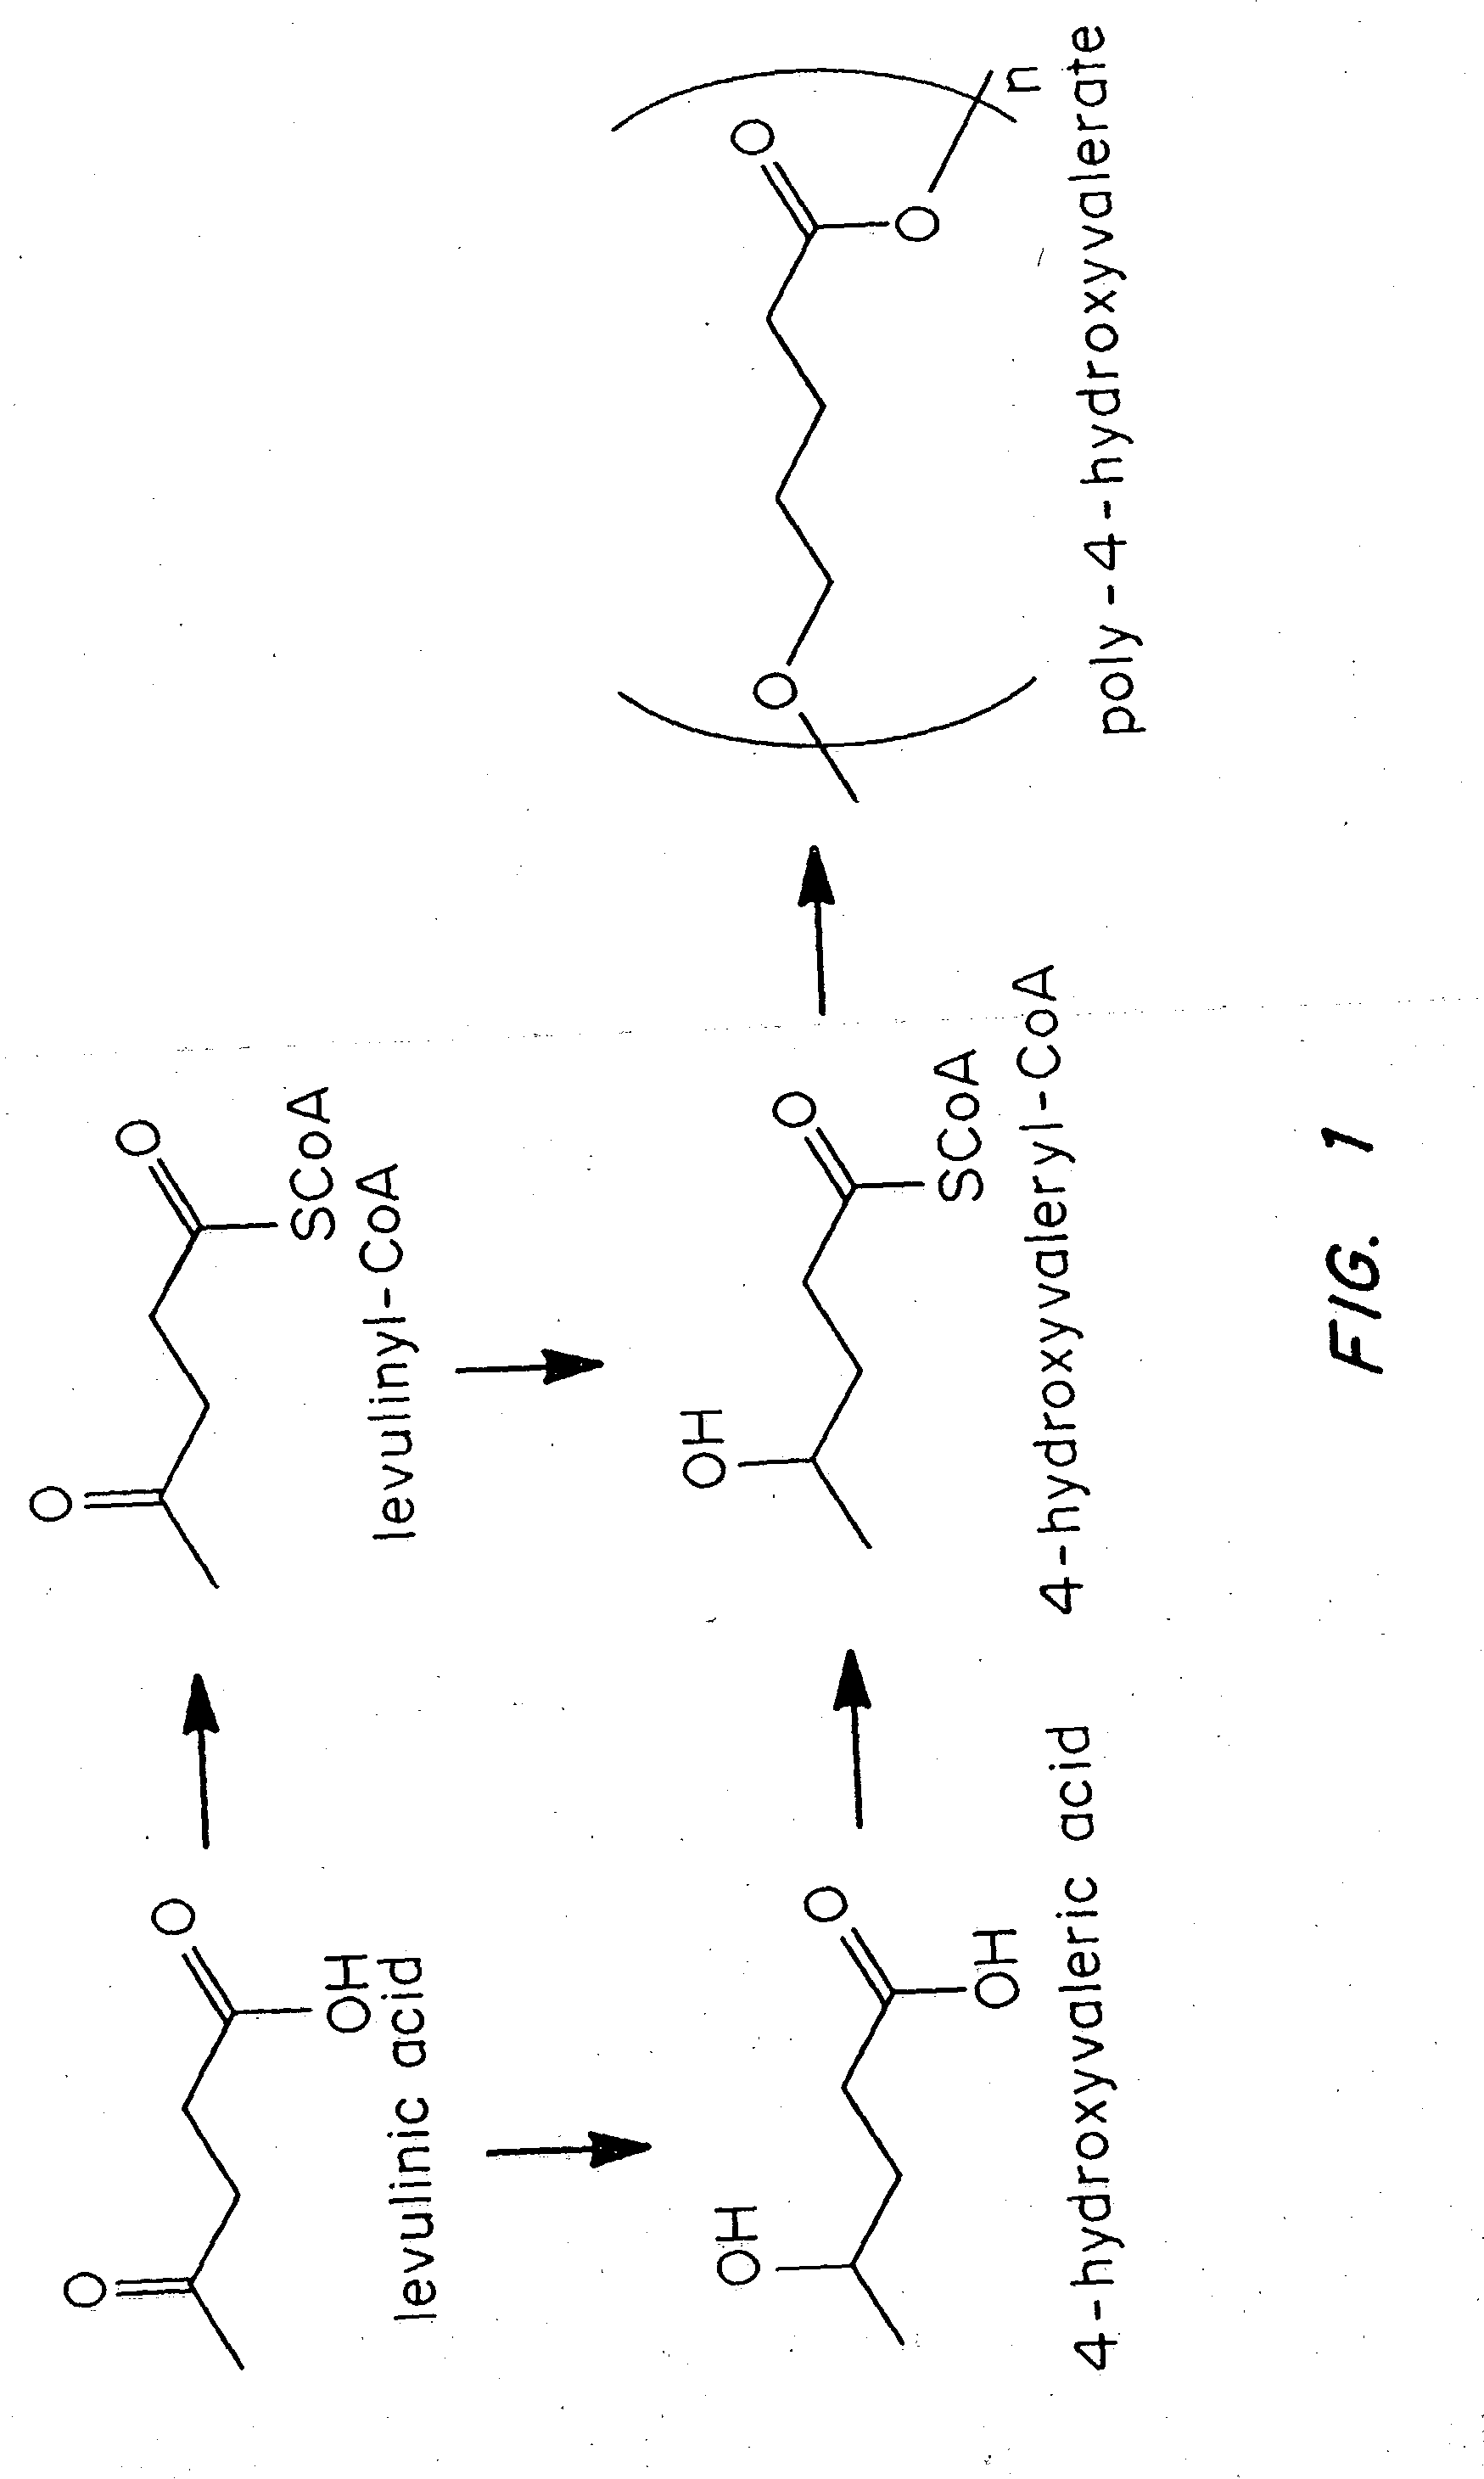 Polyhydroxyalkanoate biopolymer compositions